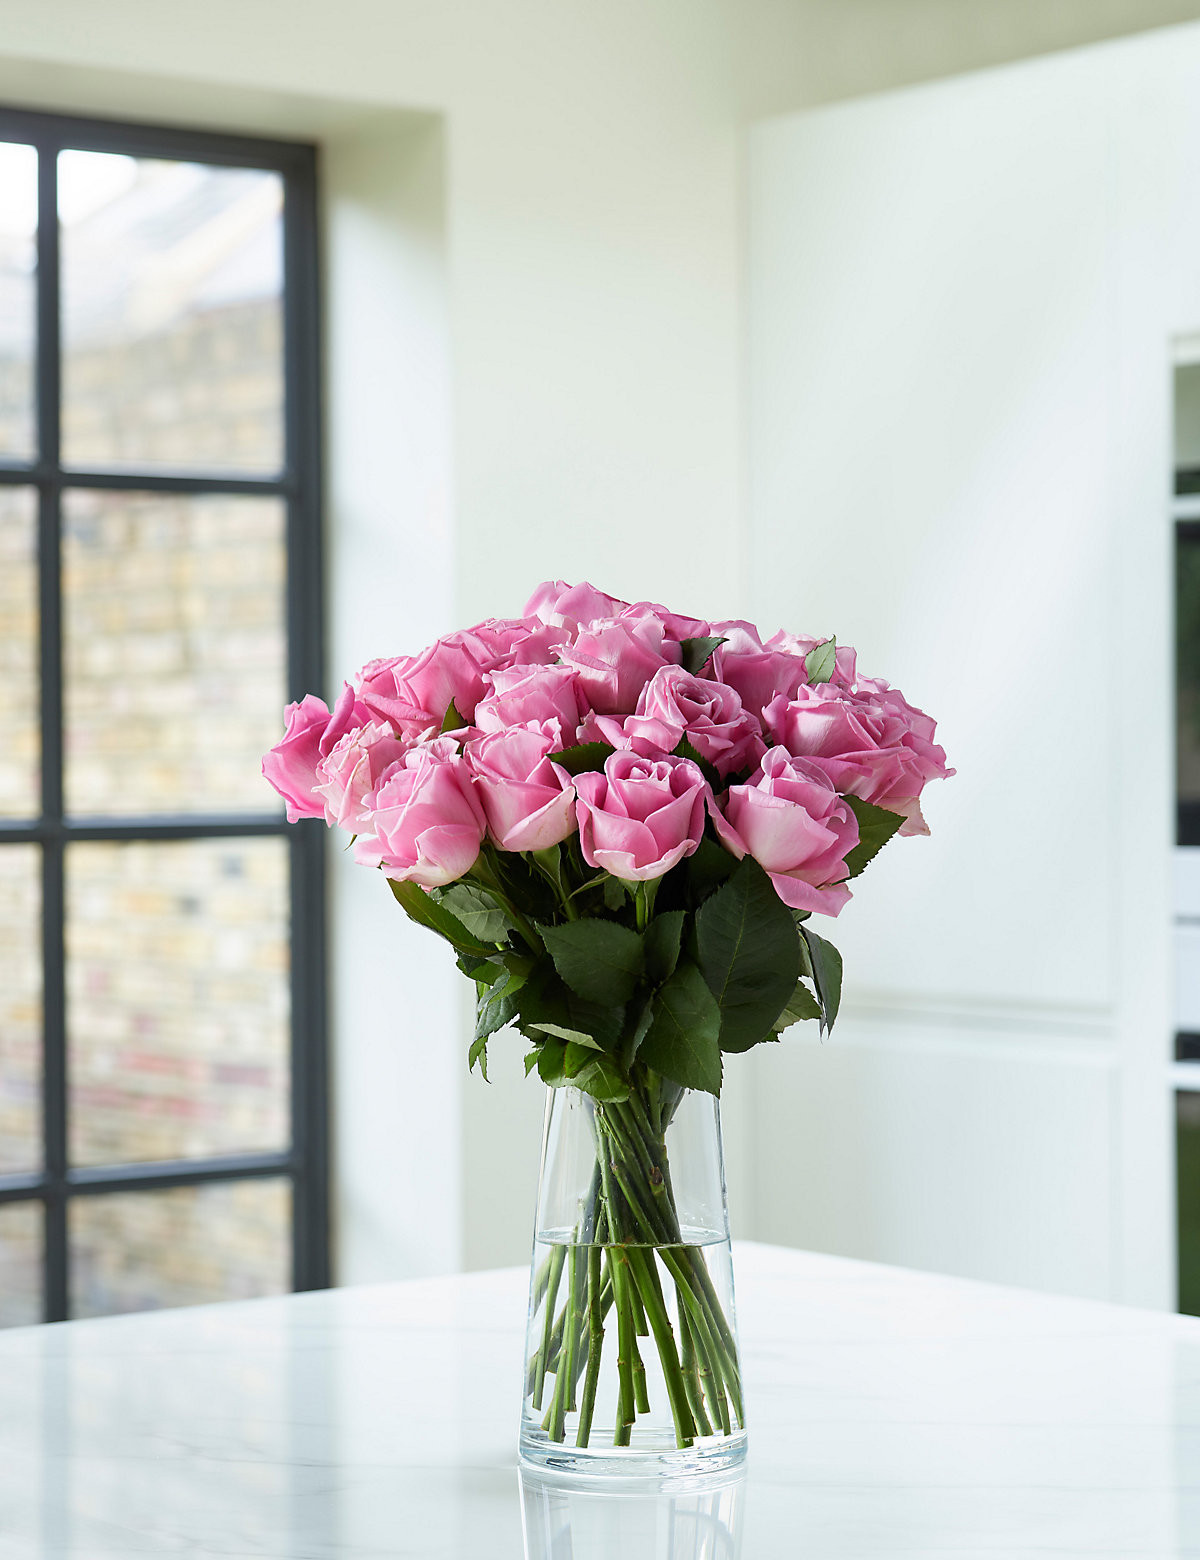 Marks and Spencer Online: Fairtrade Pink Roses at Marks and Spencer Online